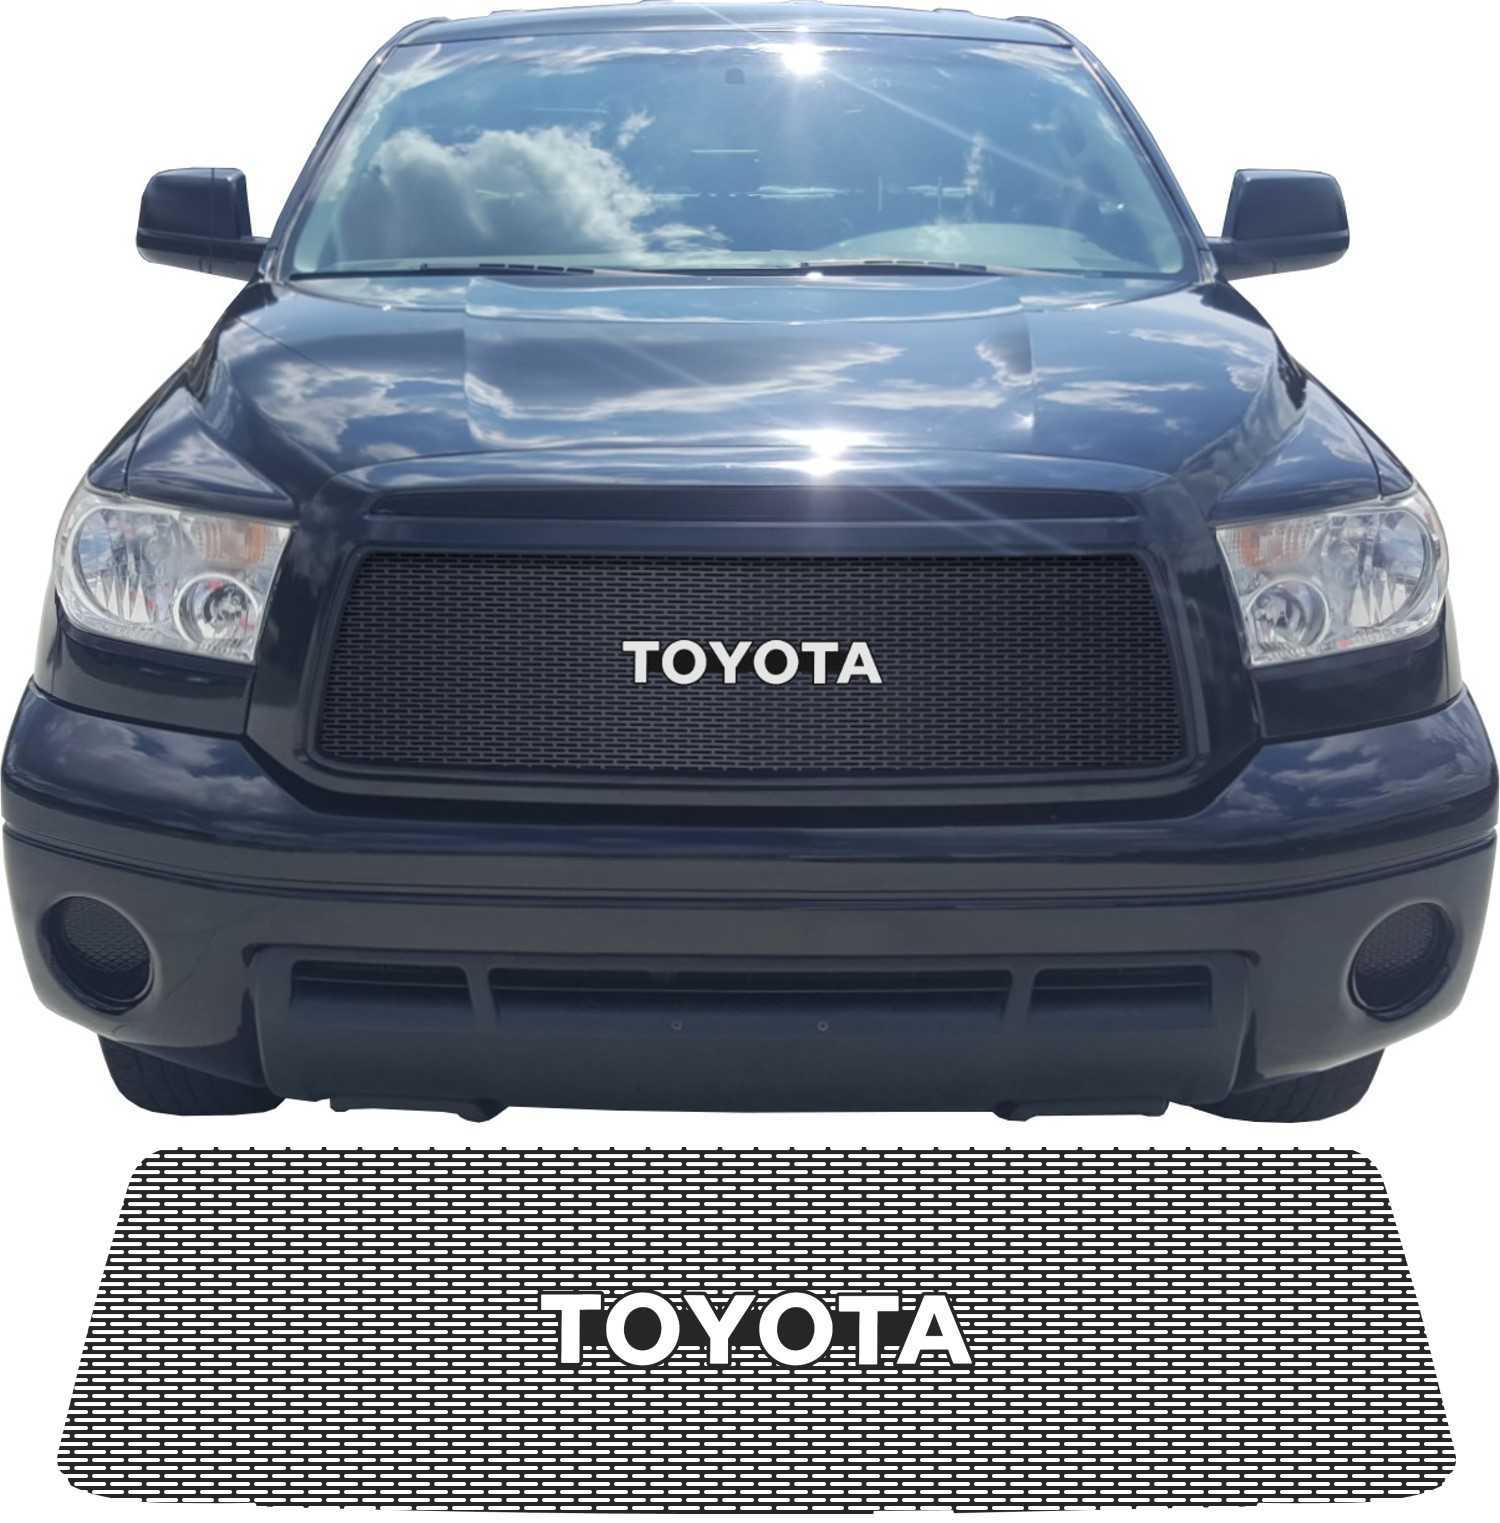 2010-13 Toyota Tundra Mesh Grill Insert with Toyota Emblem by